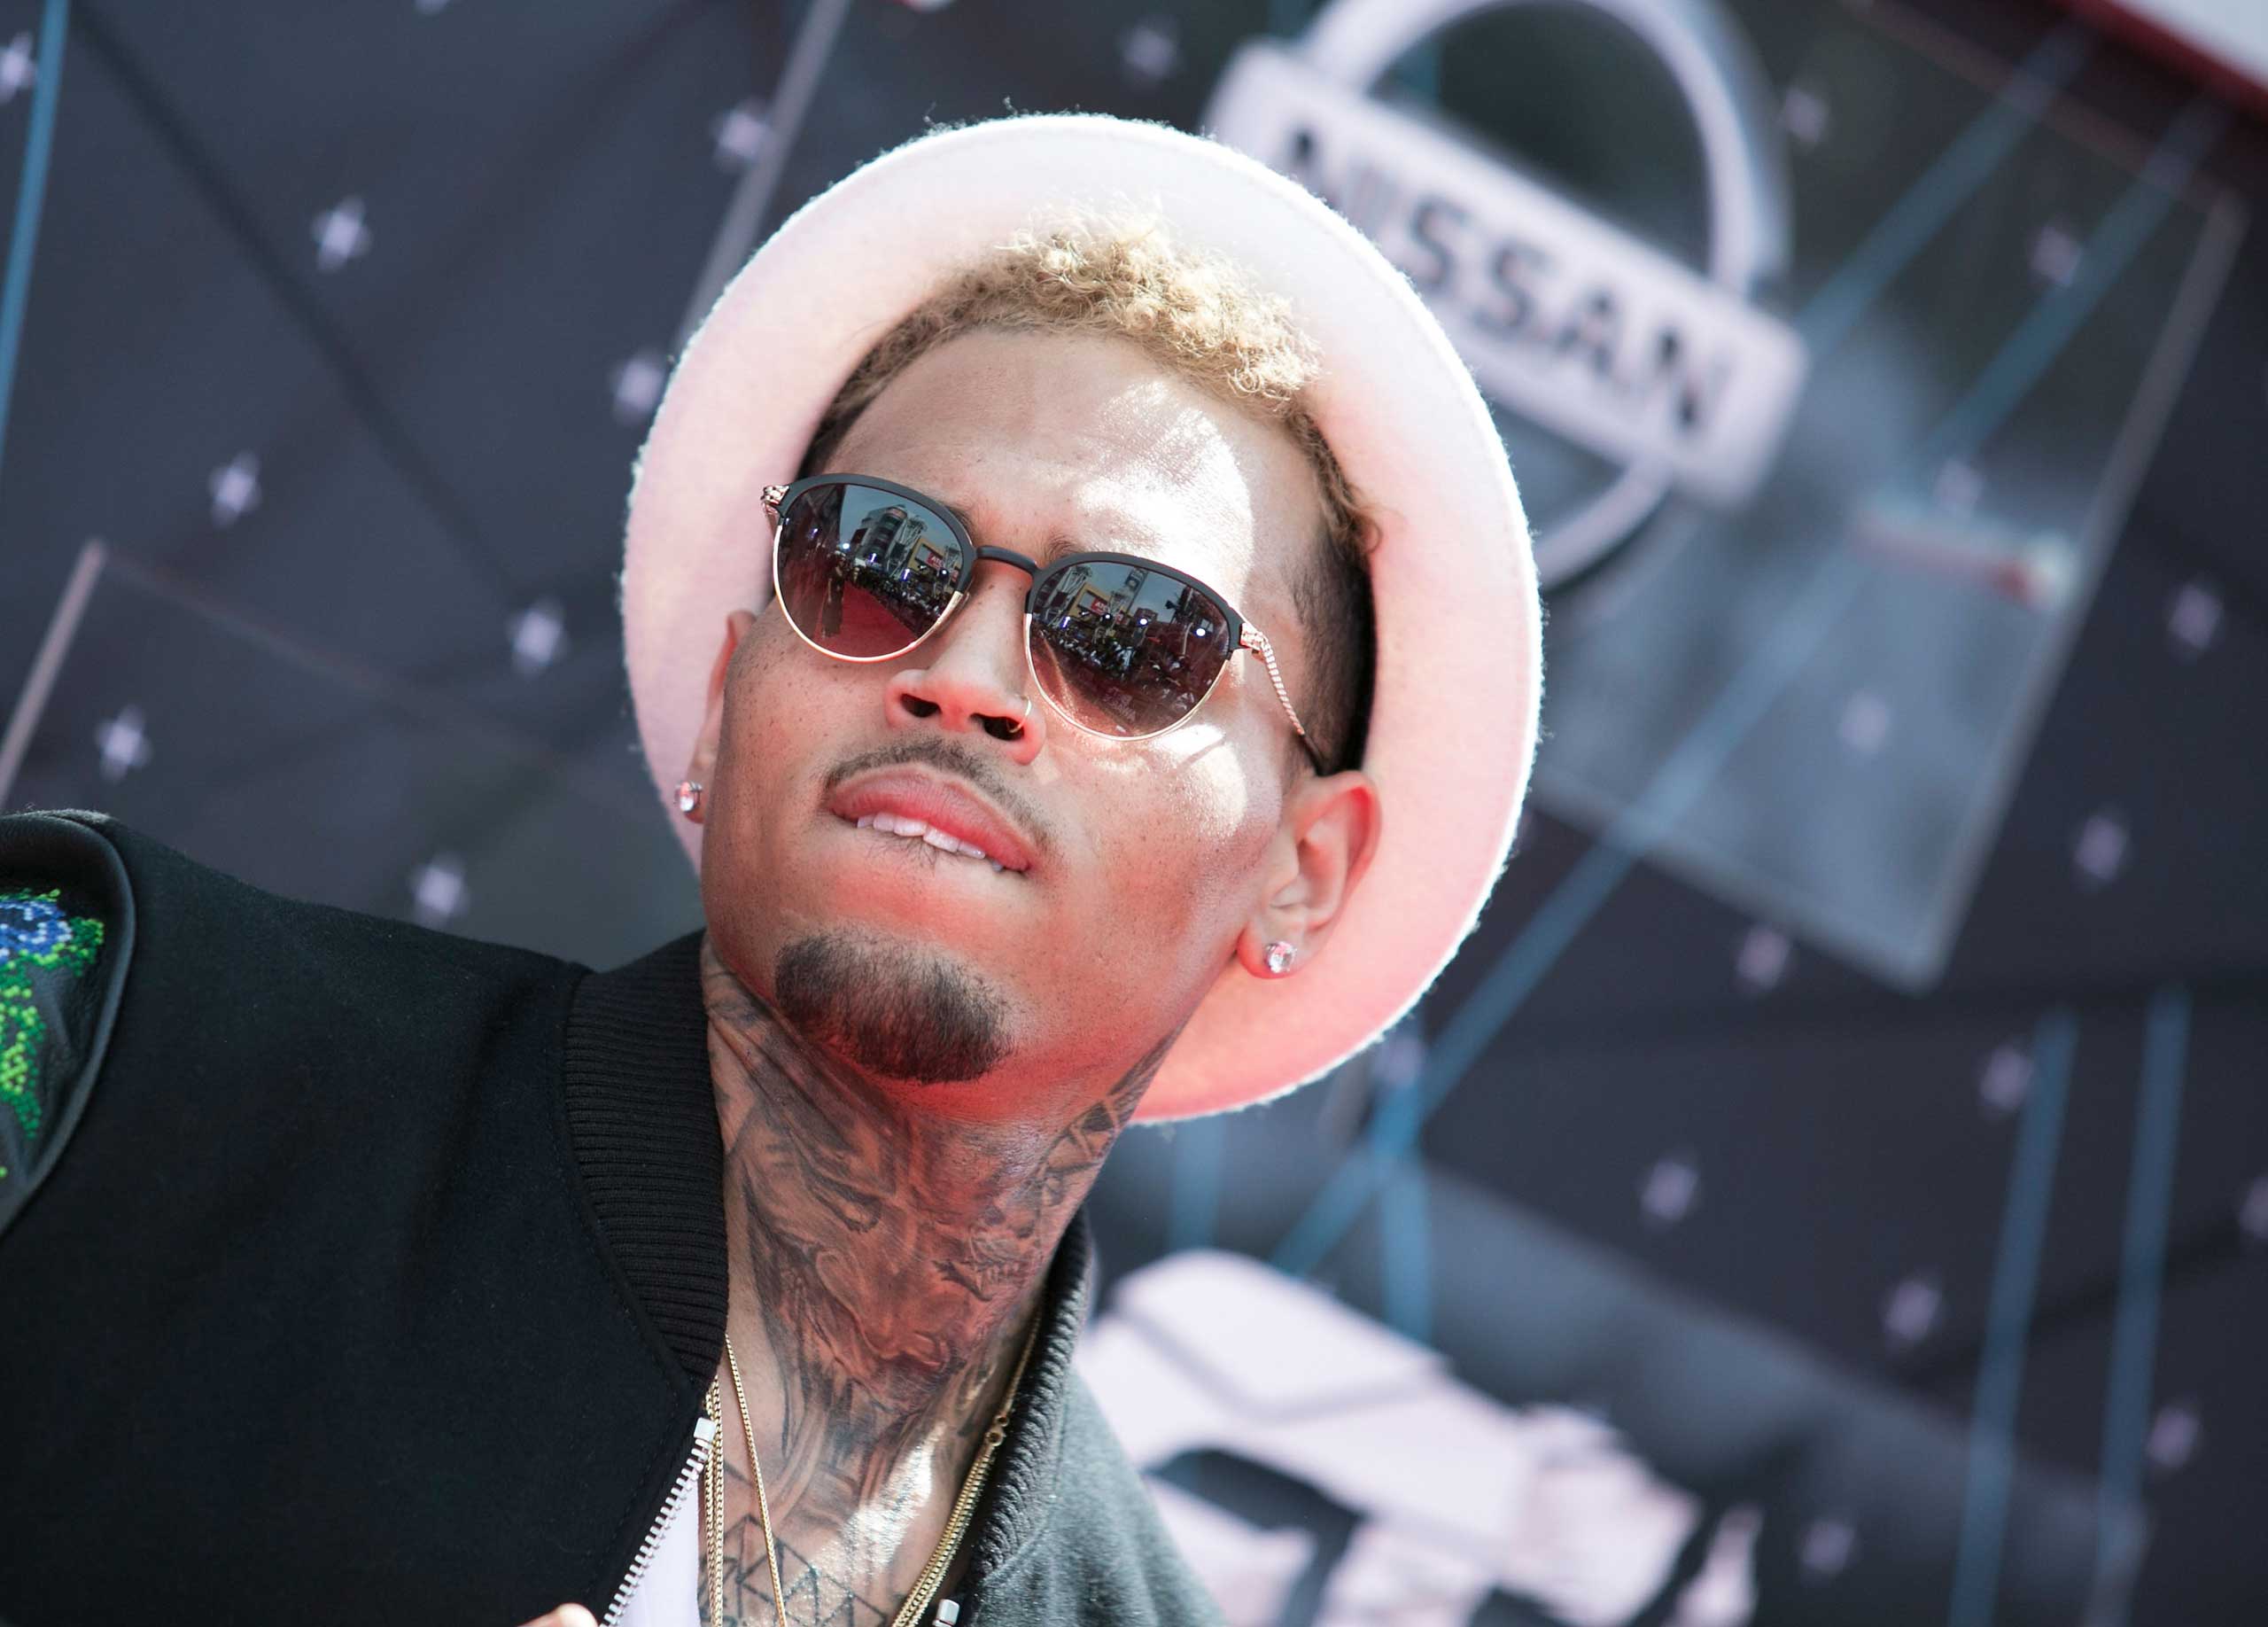 Singer Chris Brown attends the 2015 BET Awards in Los Angeles, on June 28, 2015. (Vincent Sandoval—WireImage/Getty Images)